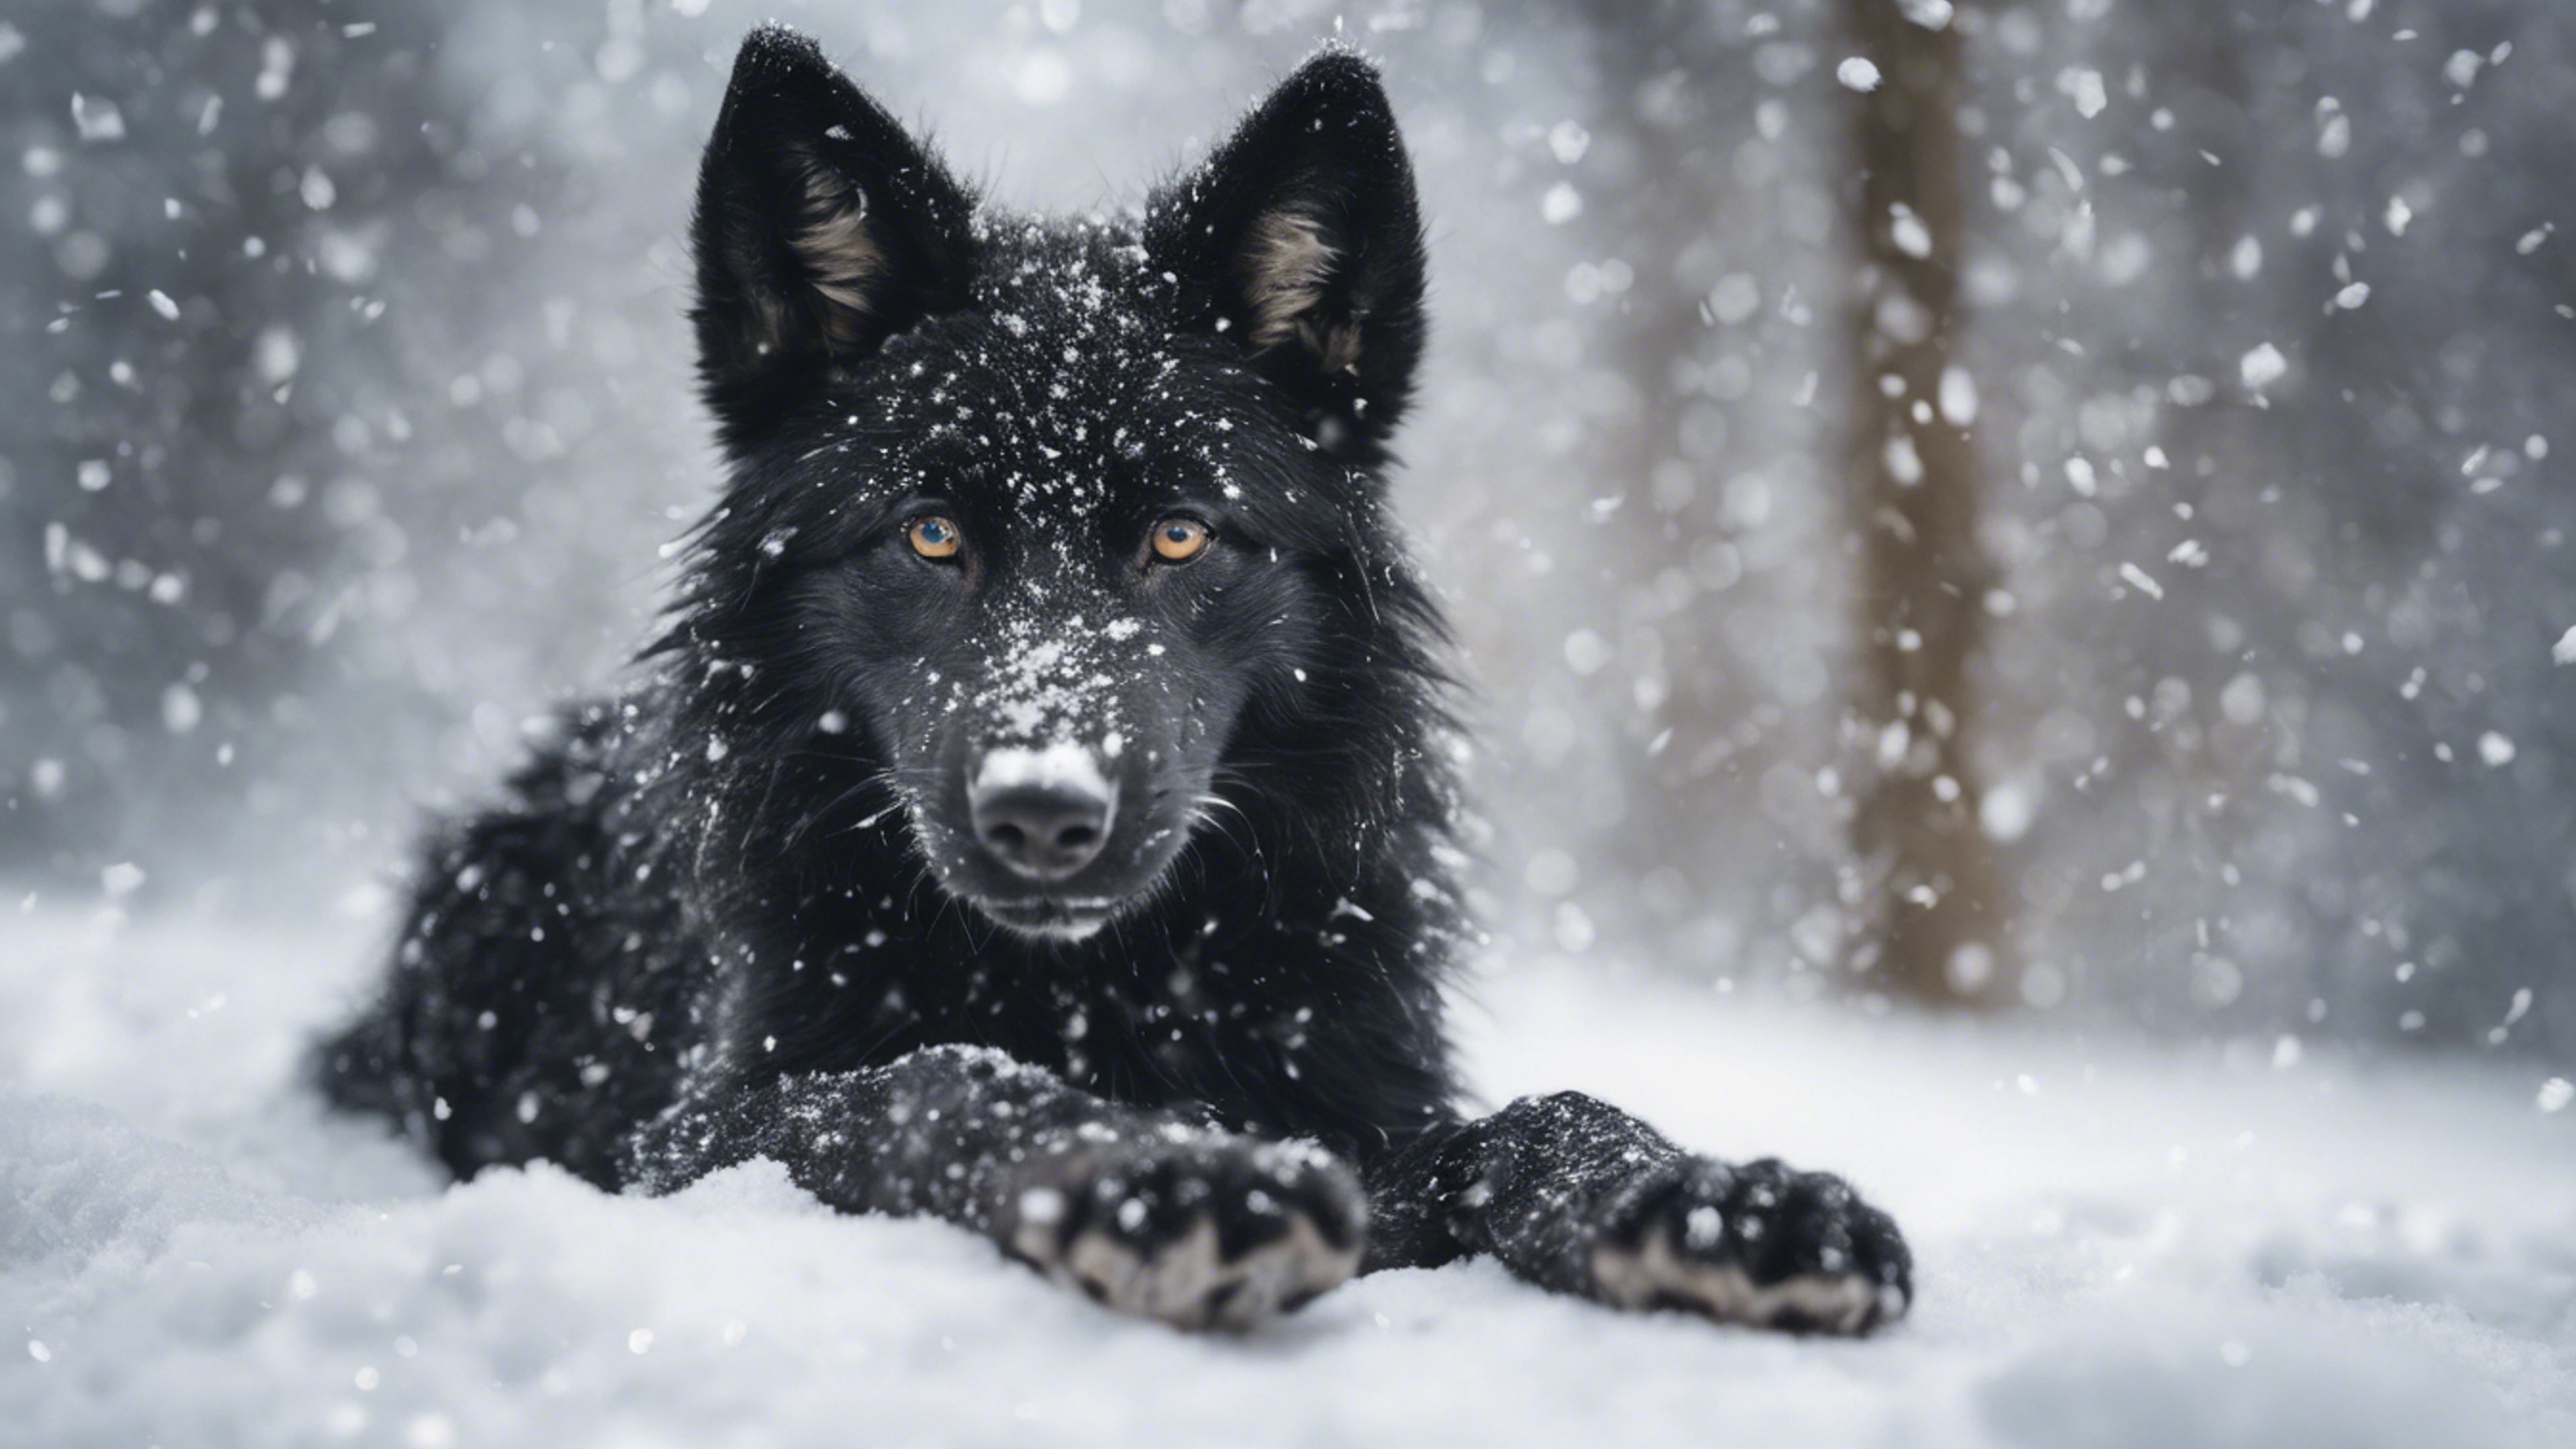 A playful black wolf puppy making the first snow angel of its life. 牆紙[6a2907d16c81420c9dae]